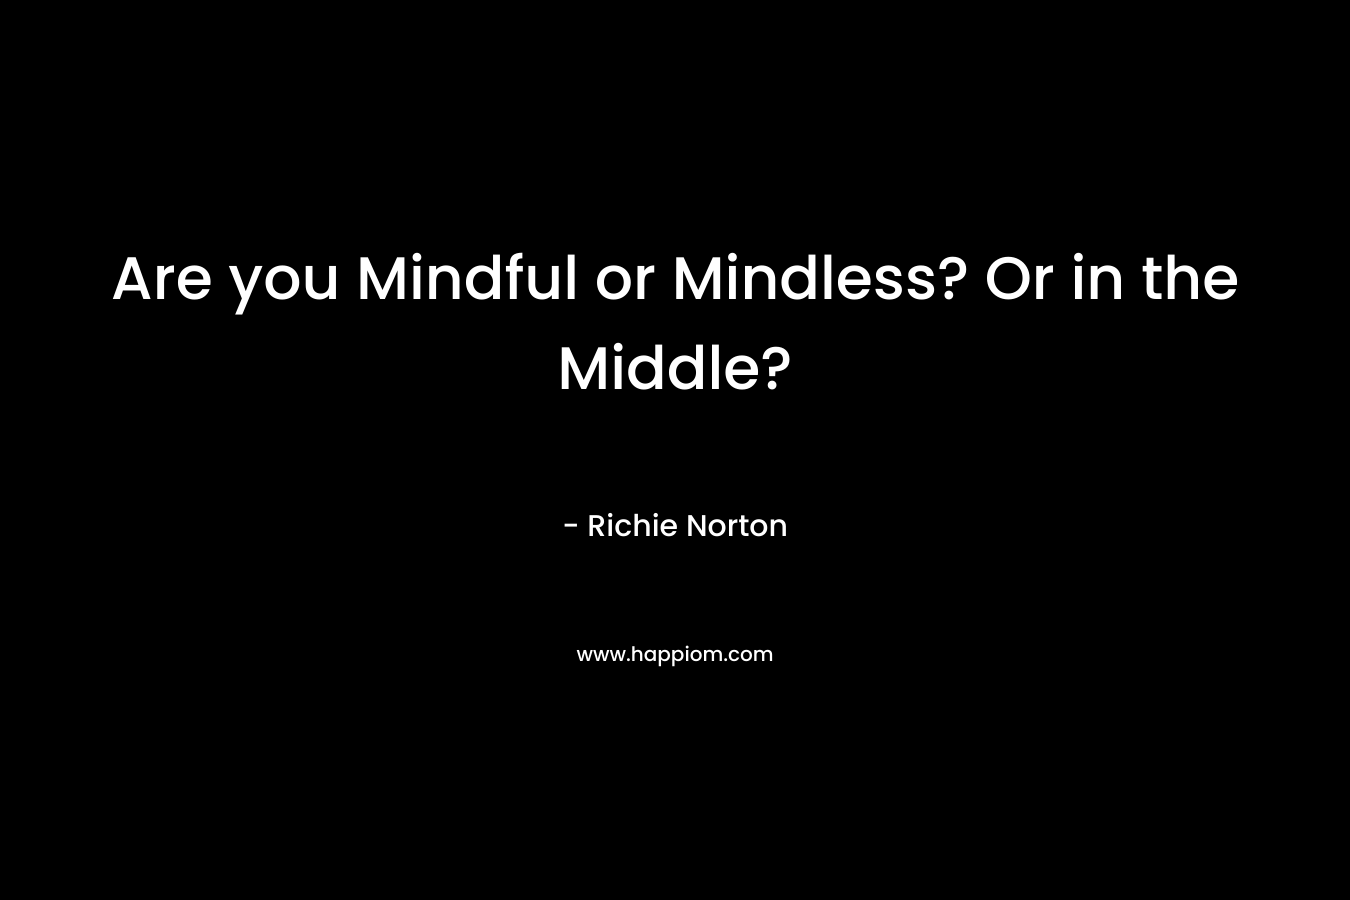 Are you Mindful or Mindless? Or in the Middle?